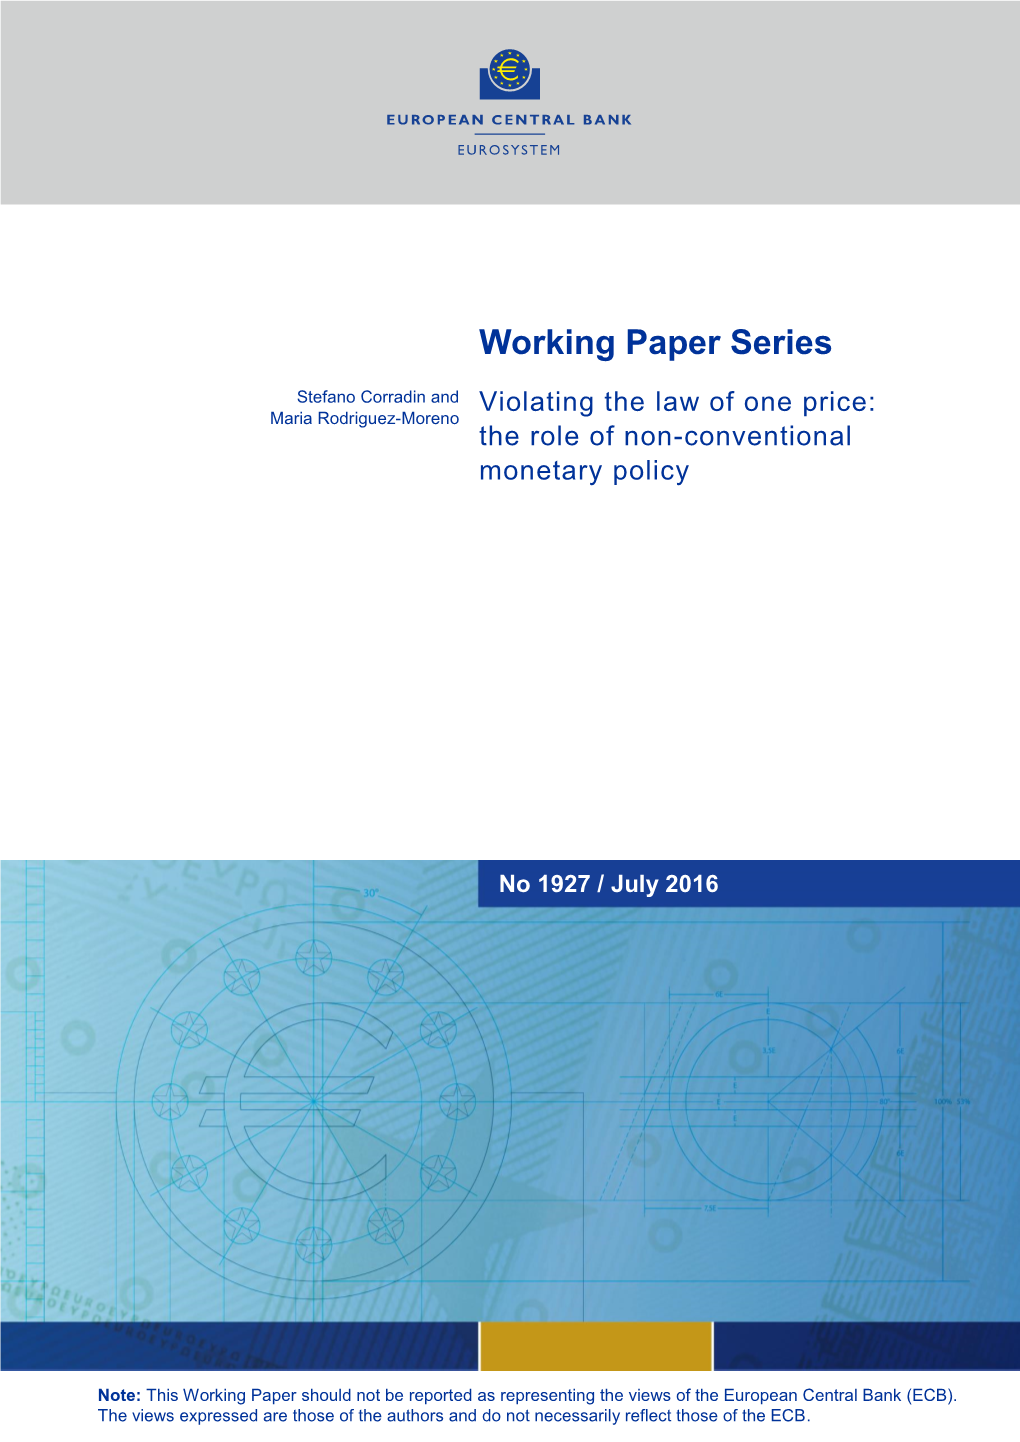 Violating the Law of One Price: the Role of Non-Conventional Monetary Policy